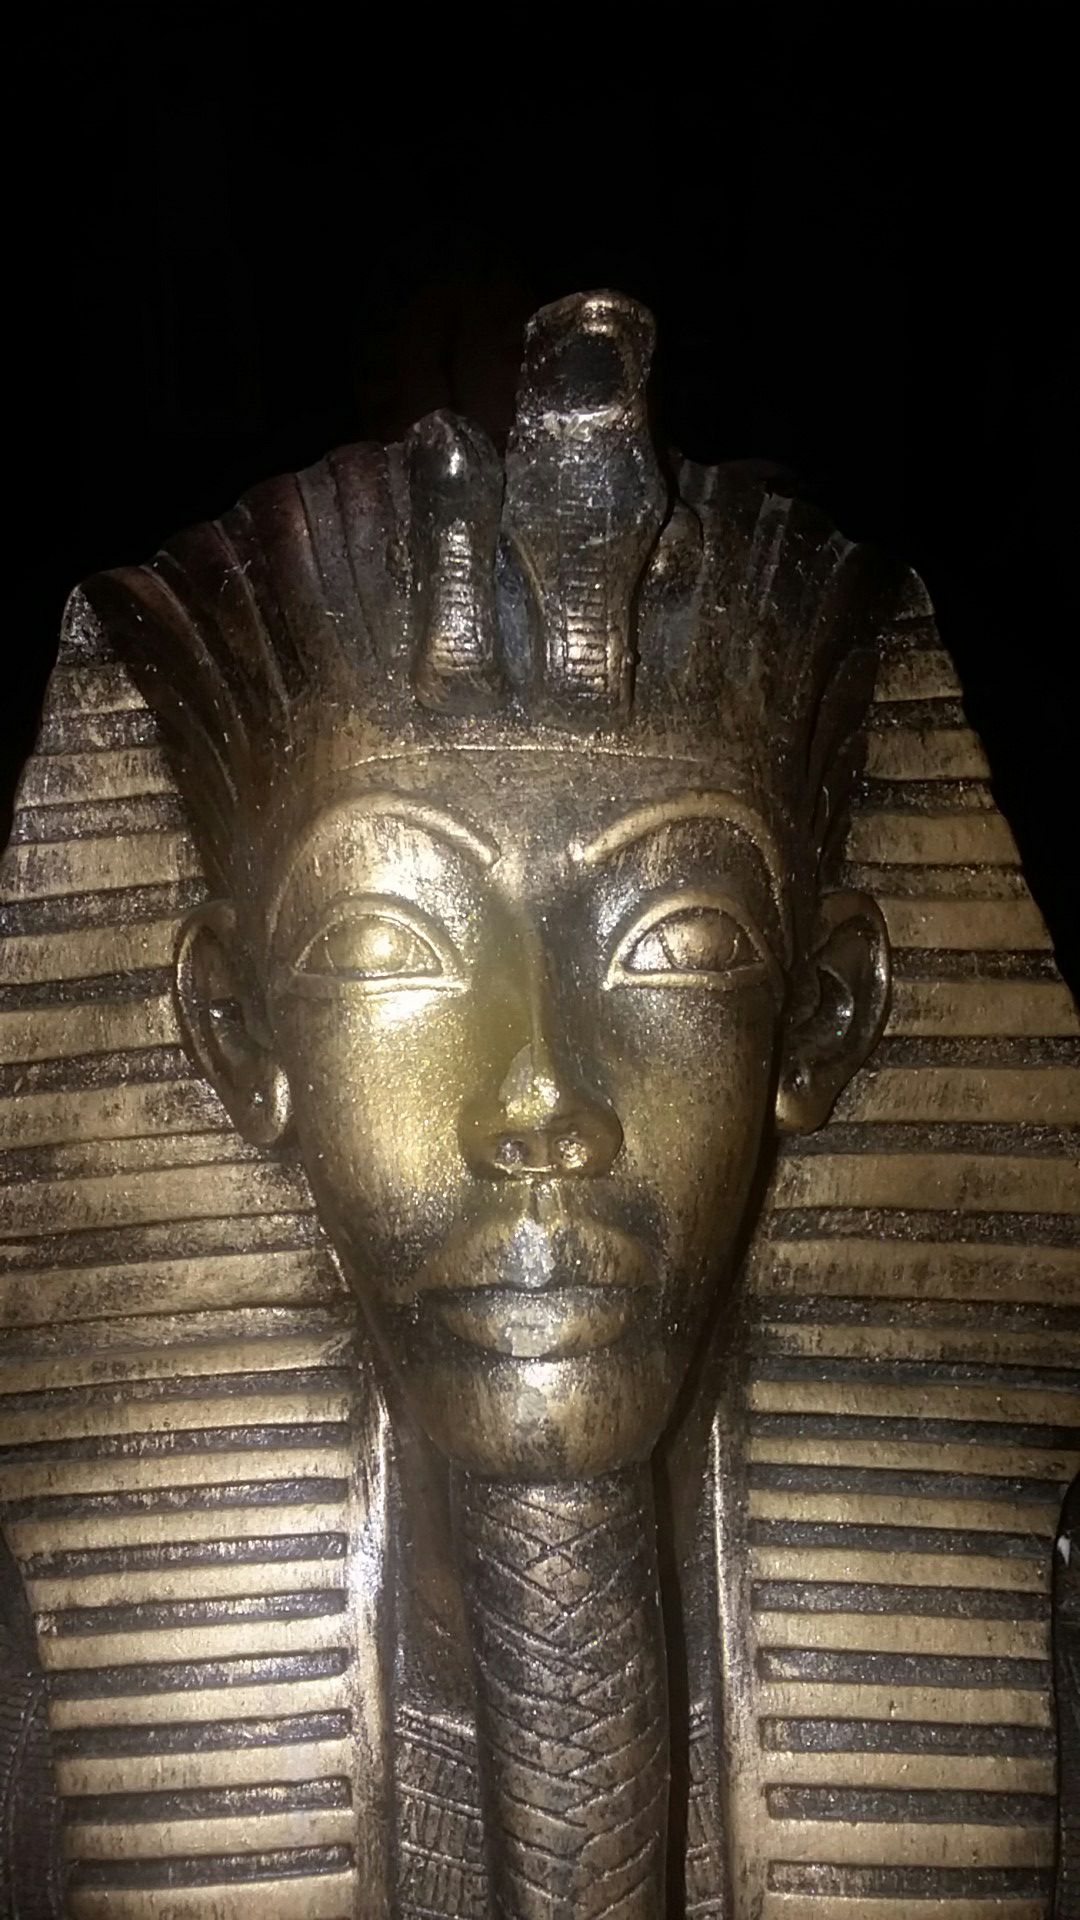 Bust of the Egyptian King Tut